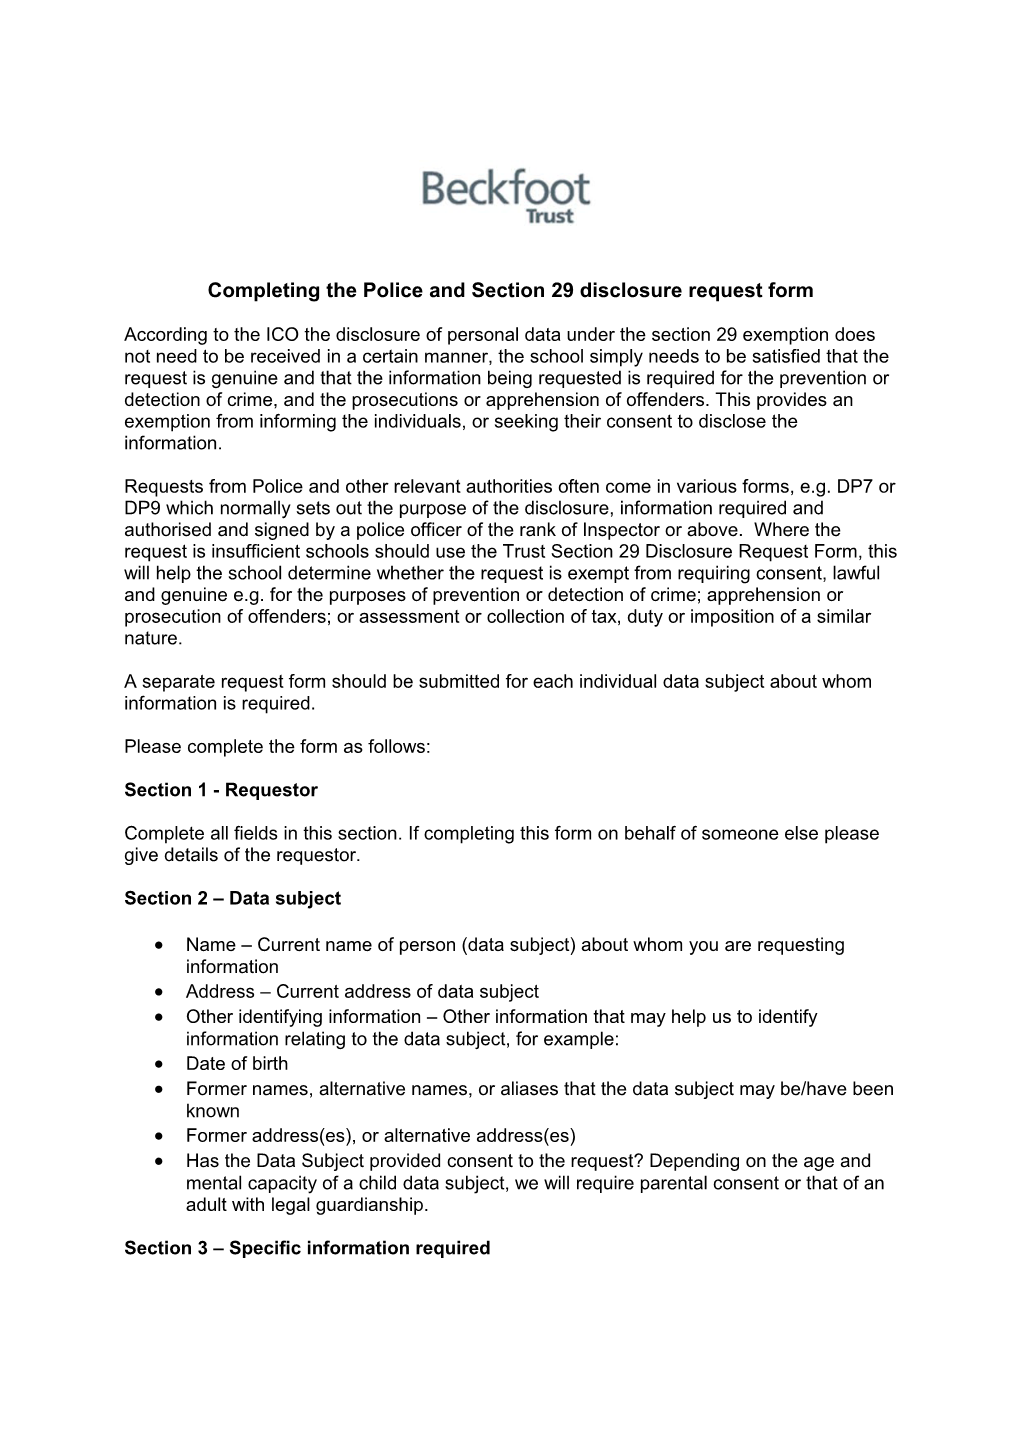 Completing the Police and Section 29 Disclosure Request Form